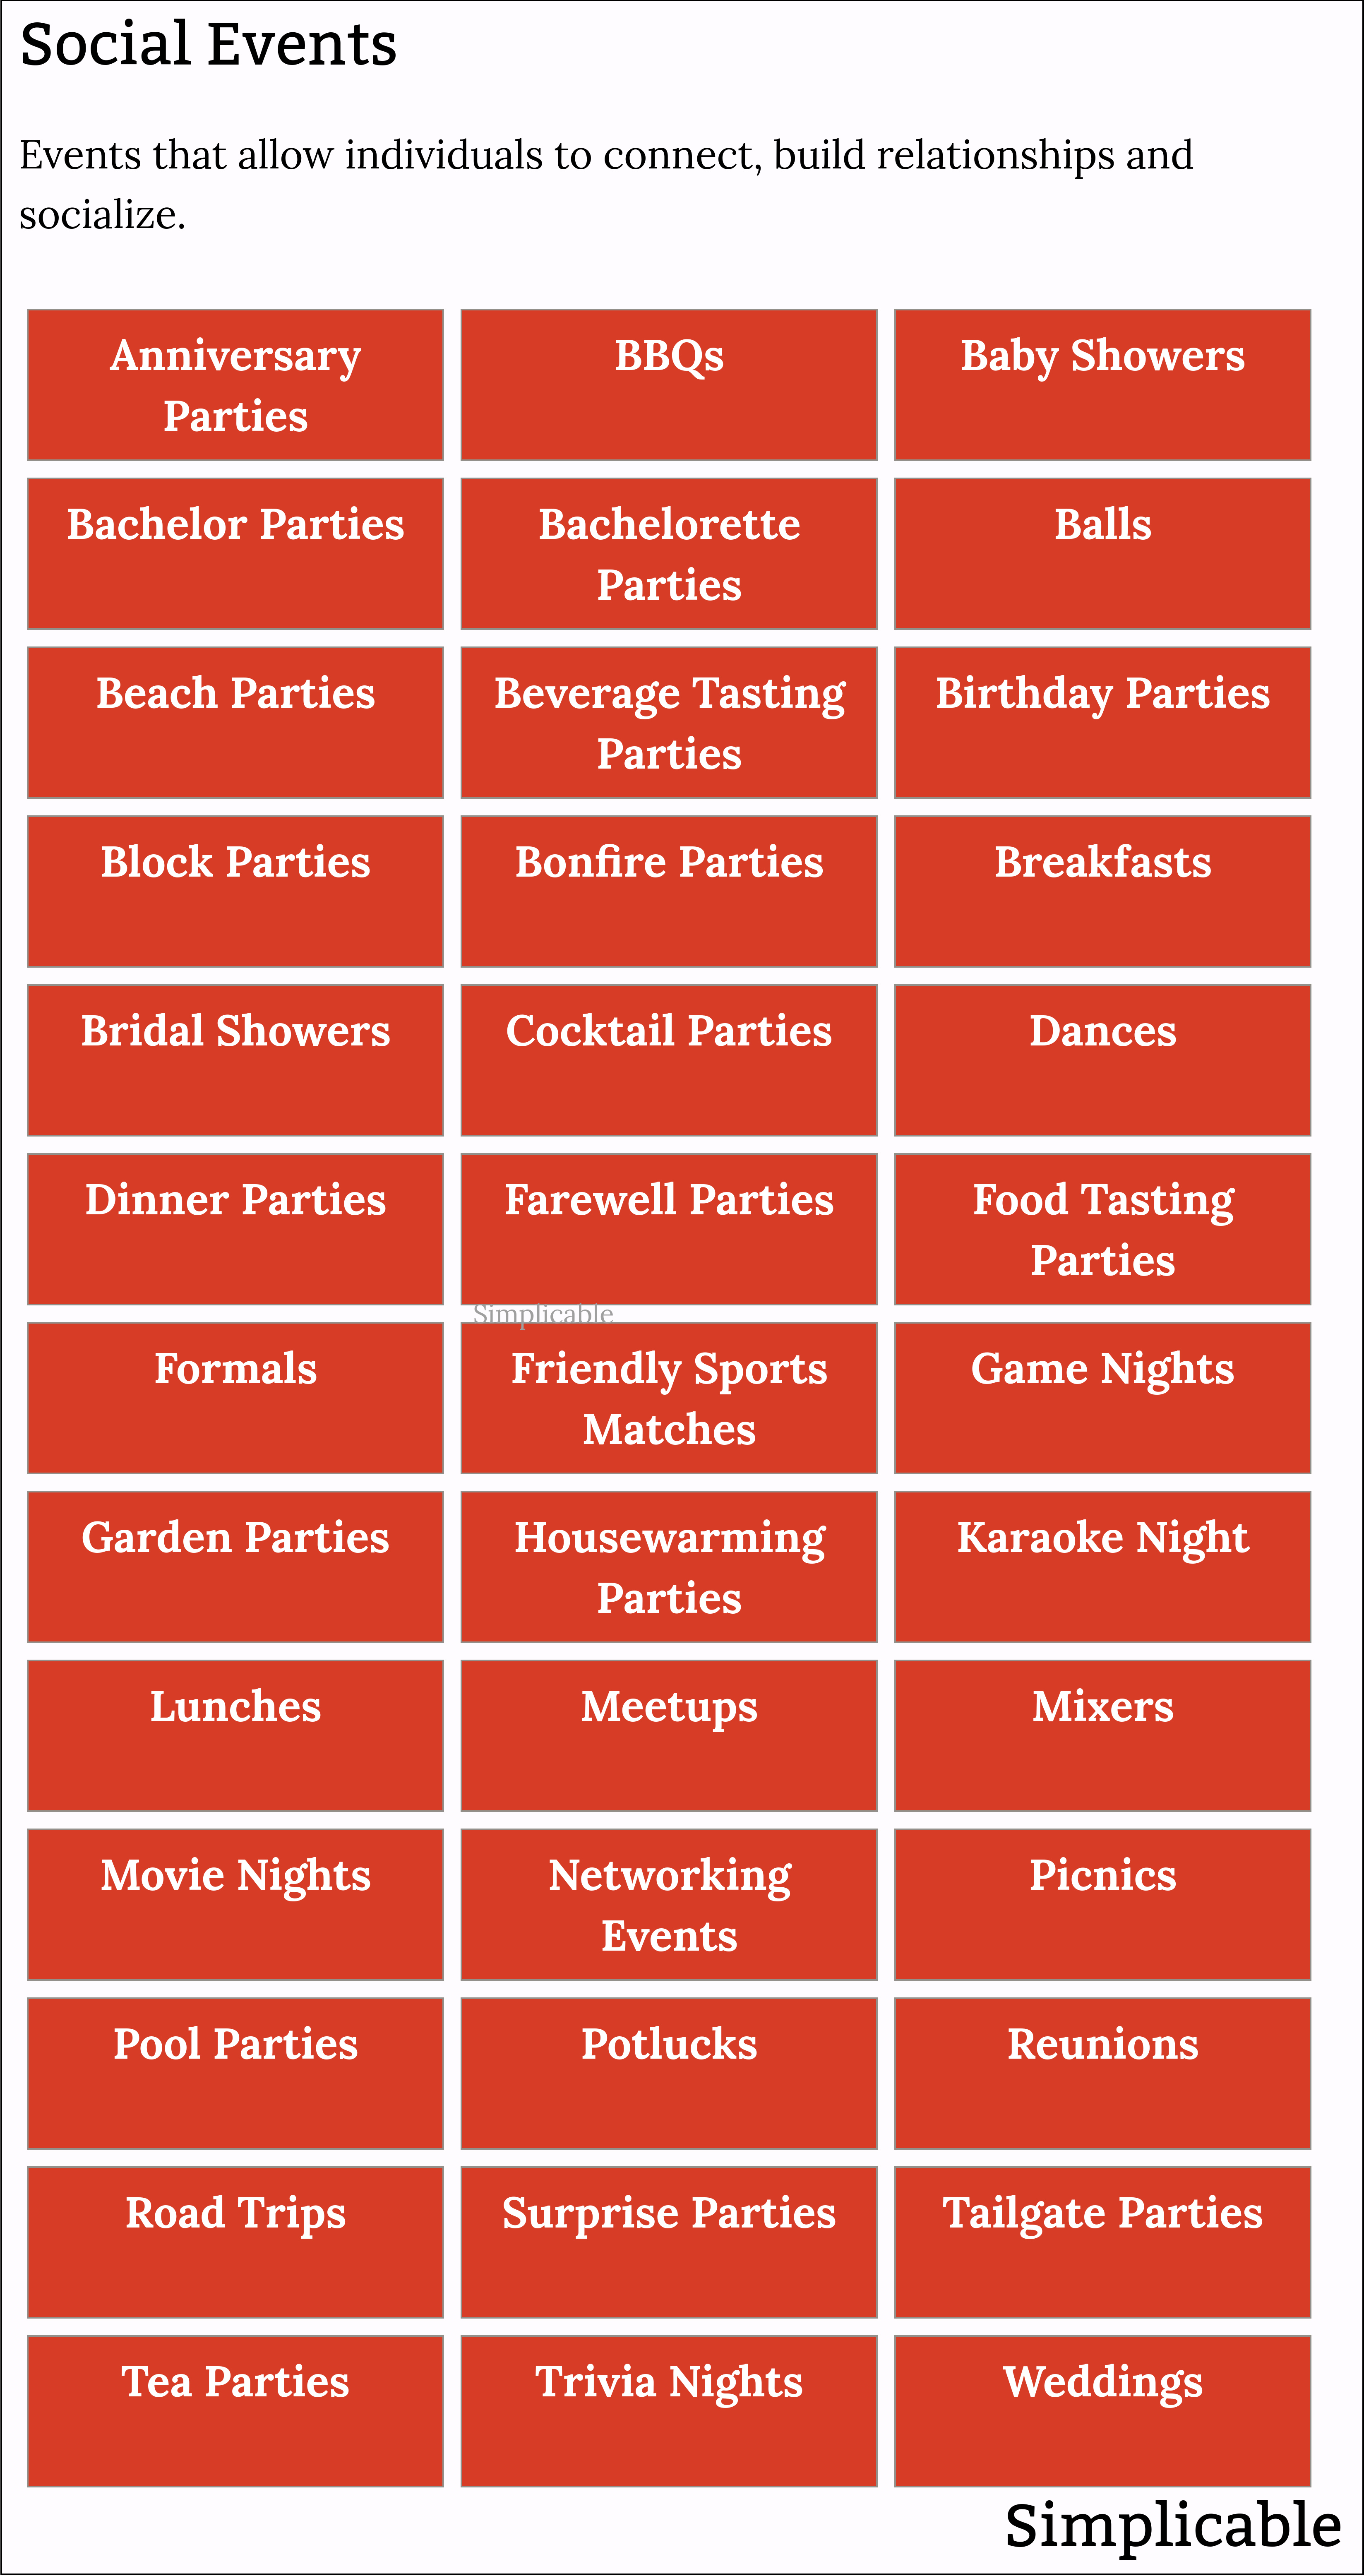 examples of social events